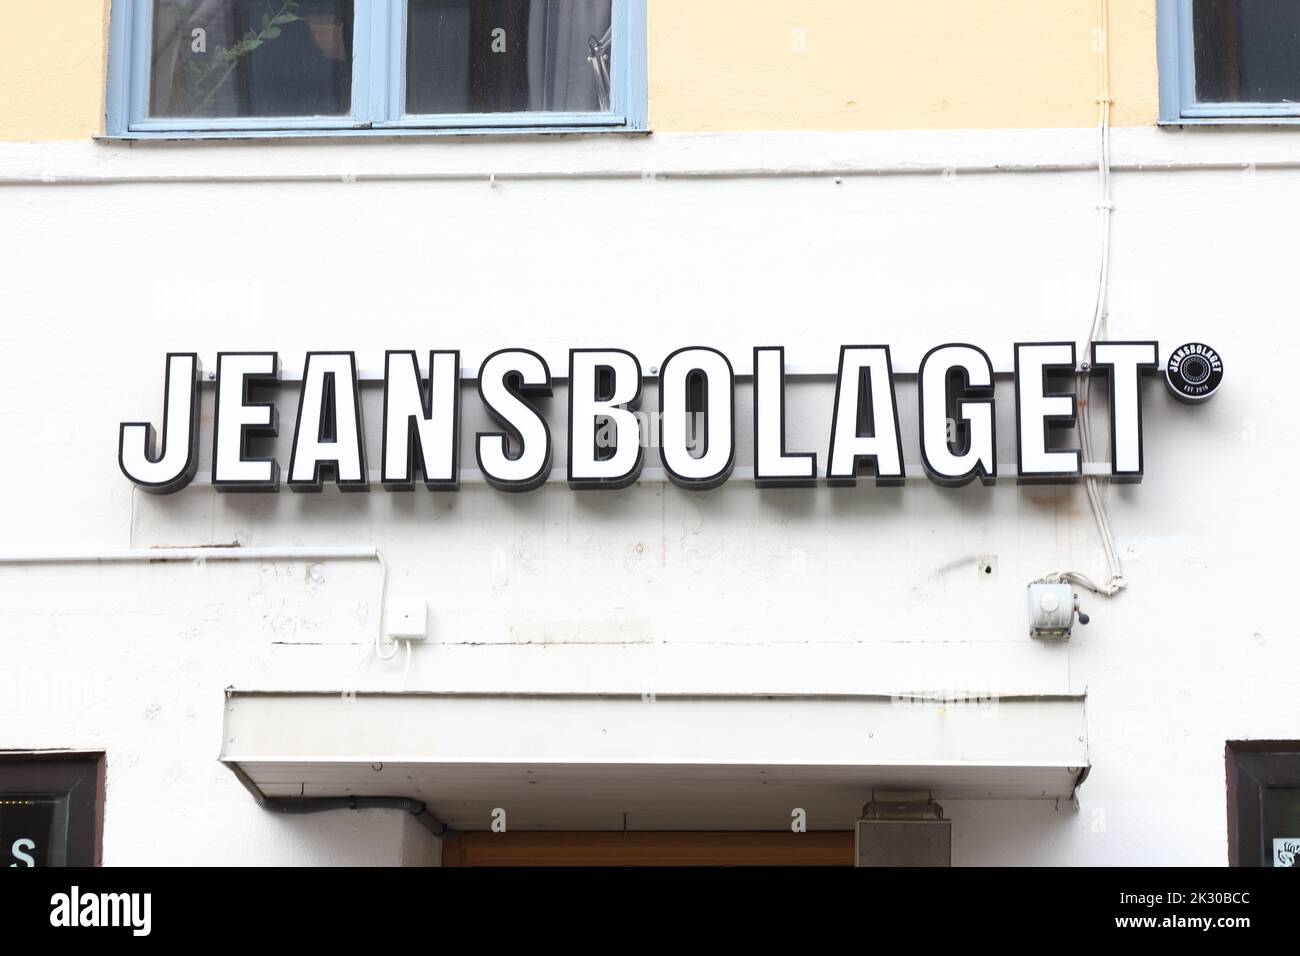 Ostersund, Sweden - September 1, 2022: Close-up of the clothing store Jeansbolaget sign. Stock Photo